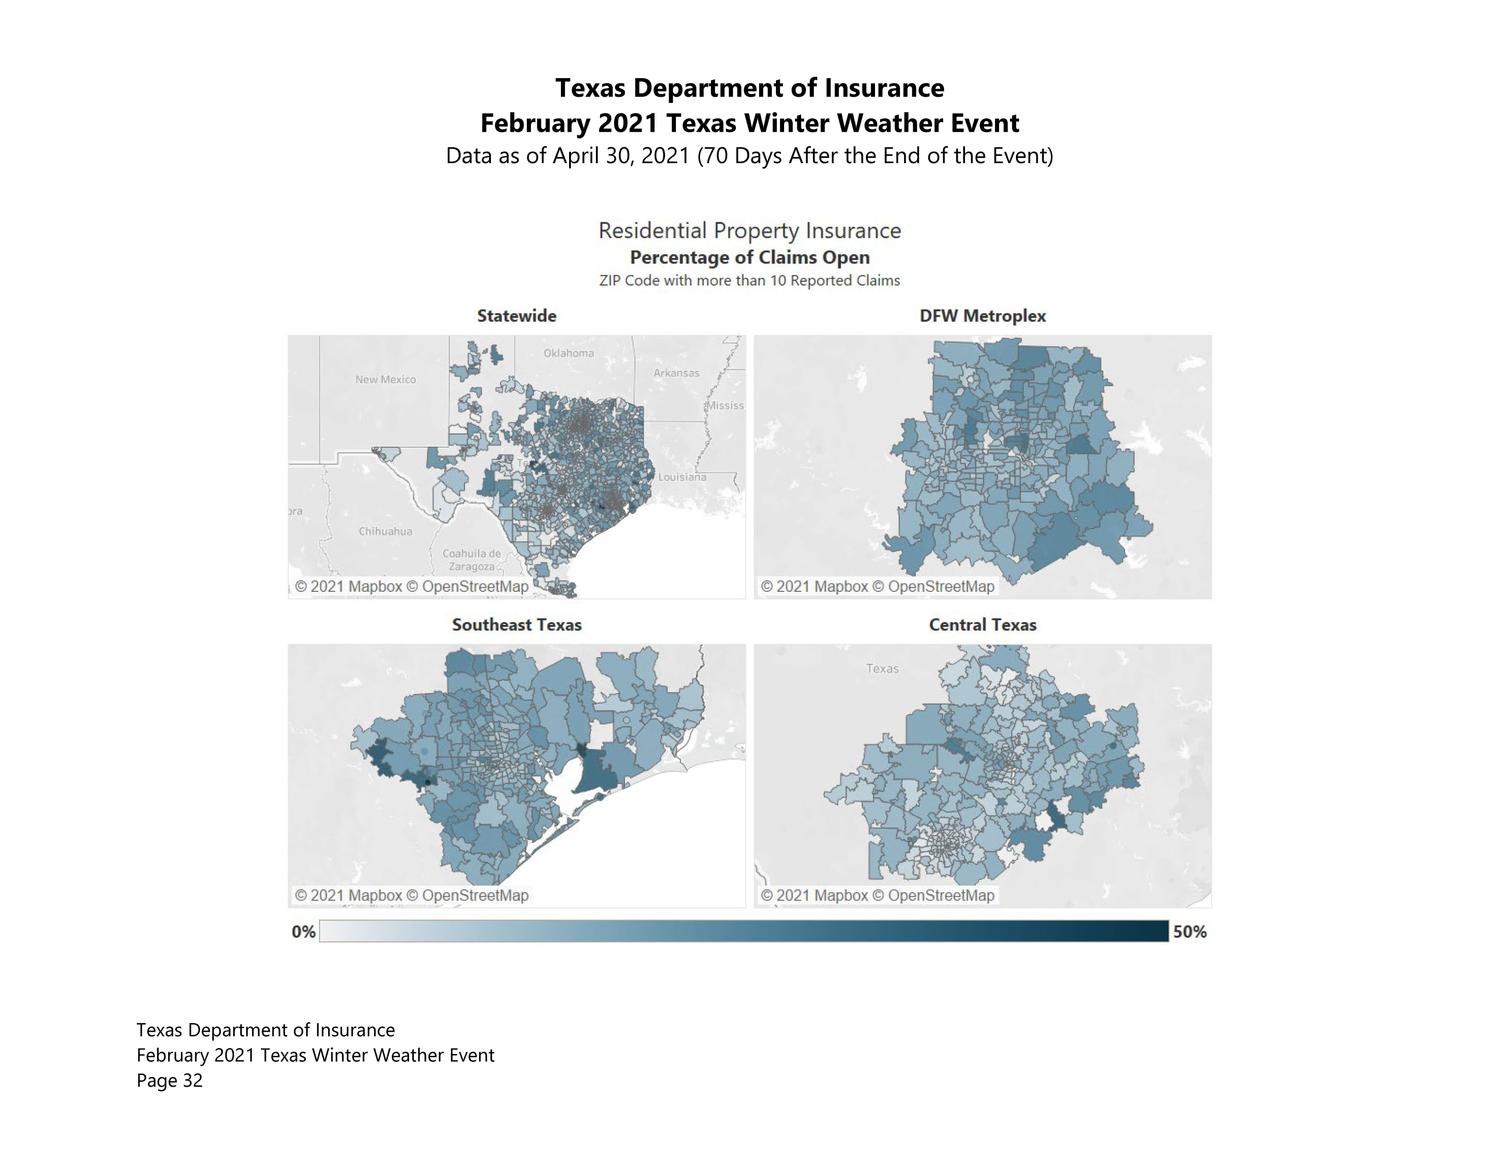 Insured Losses Resulting from the February 2021 Texas Winter Weather Event: April 2021
                                                
                                                    32
                                                